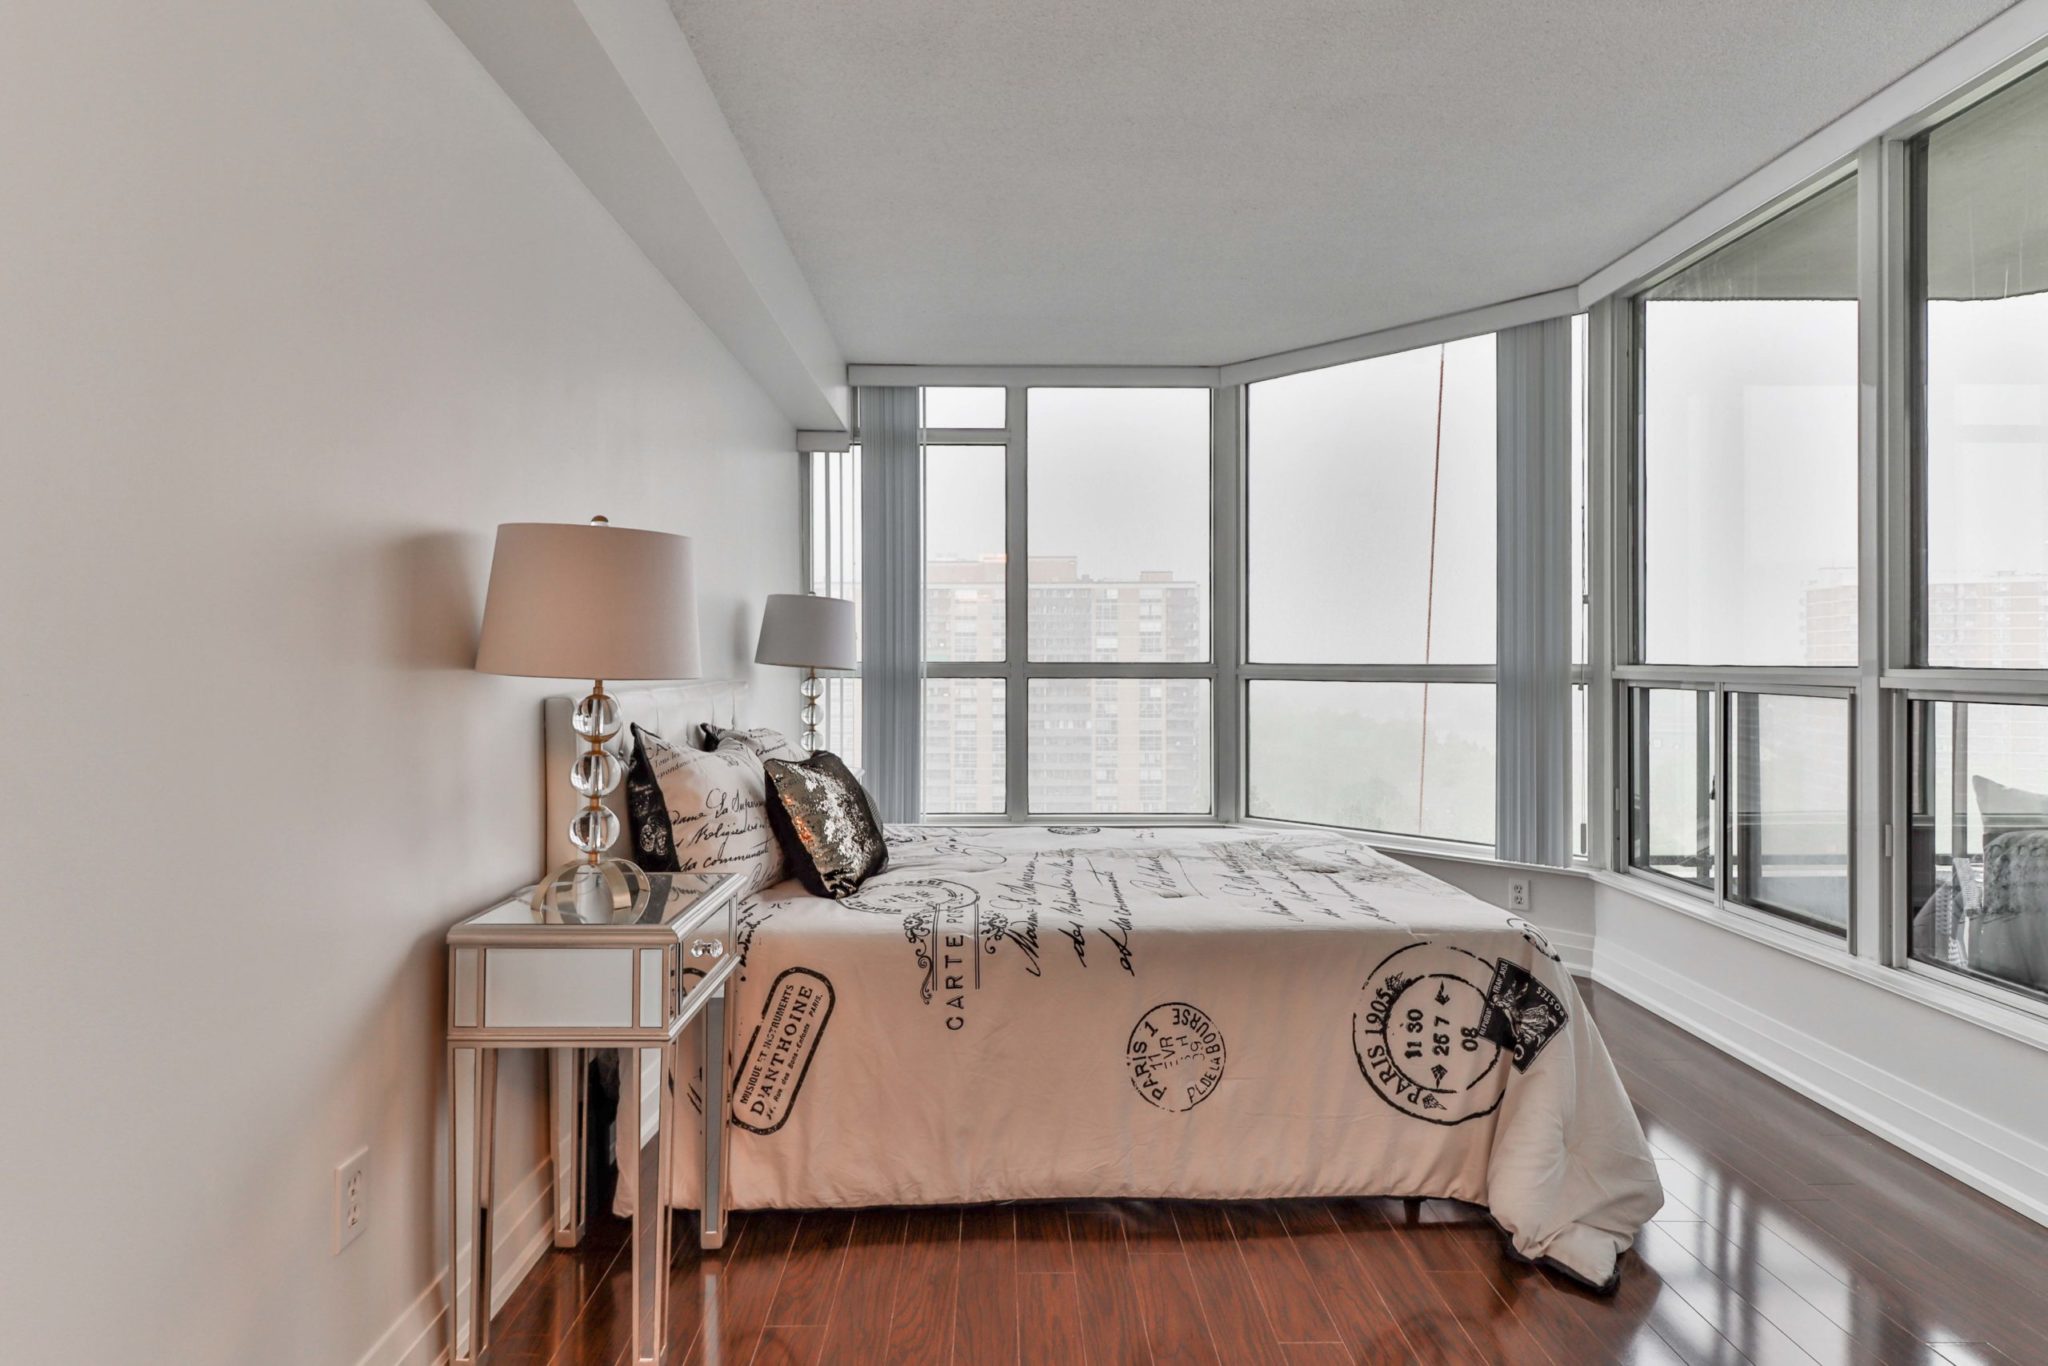 Condo bedroom with large windows and shiny laminate floors.